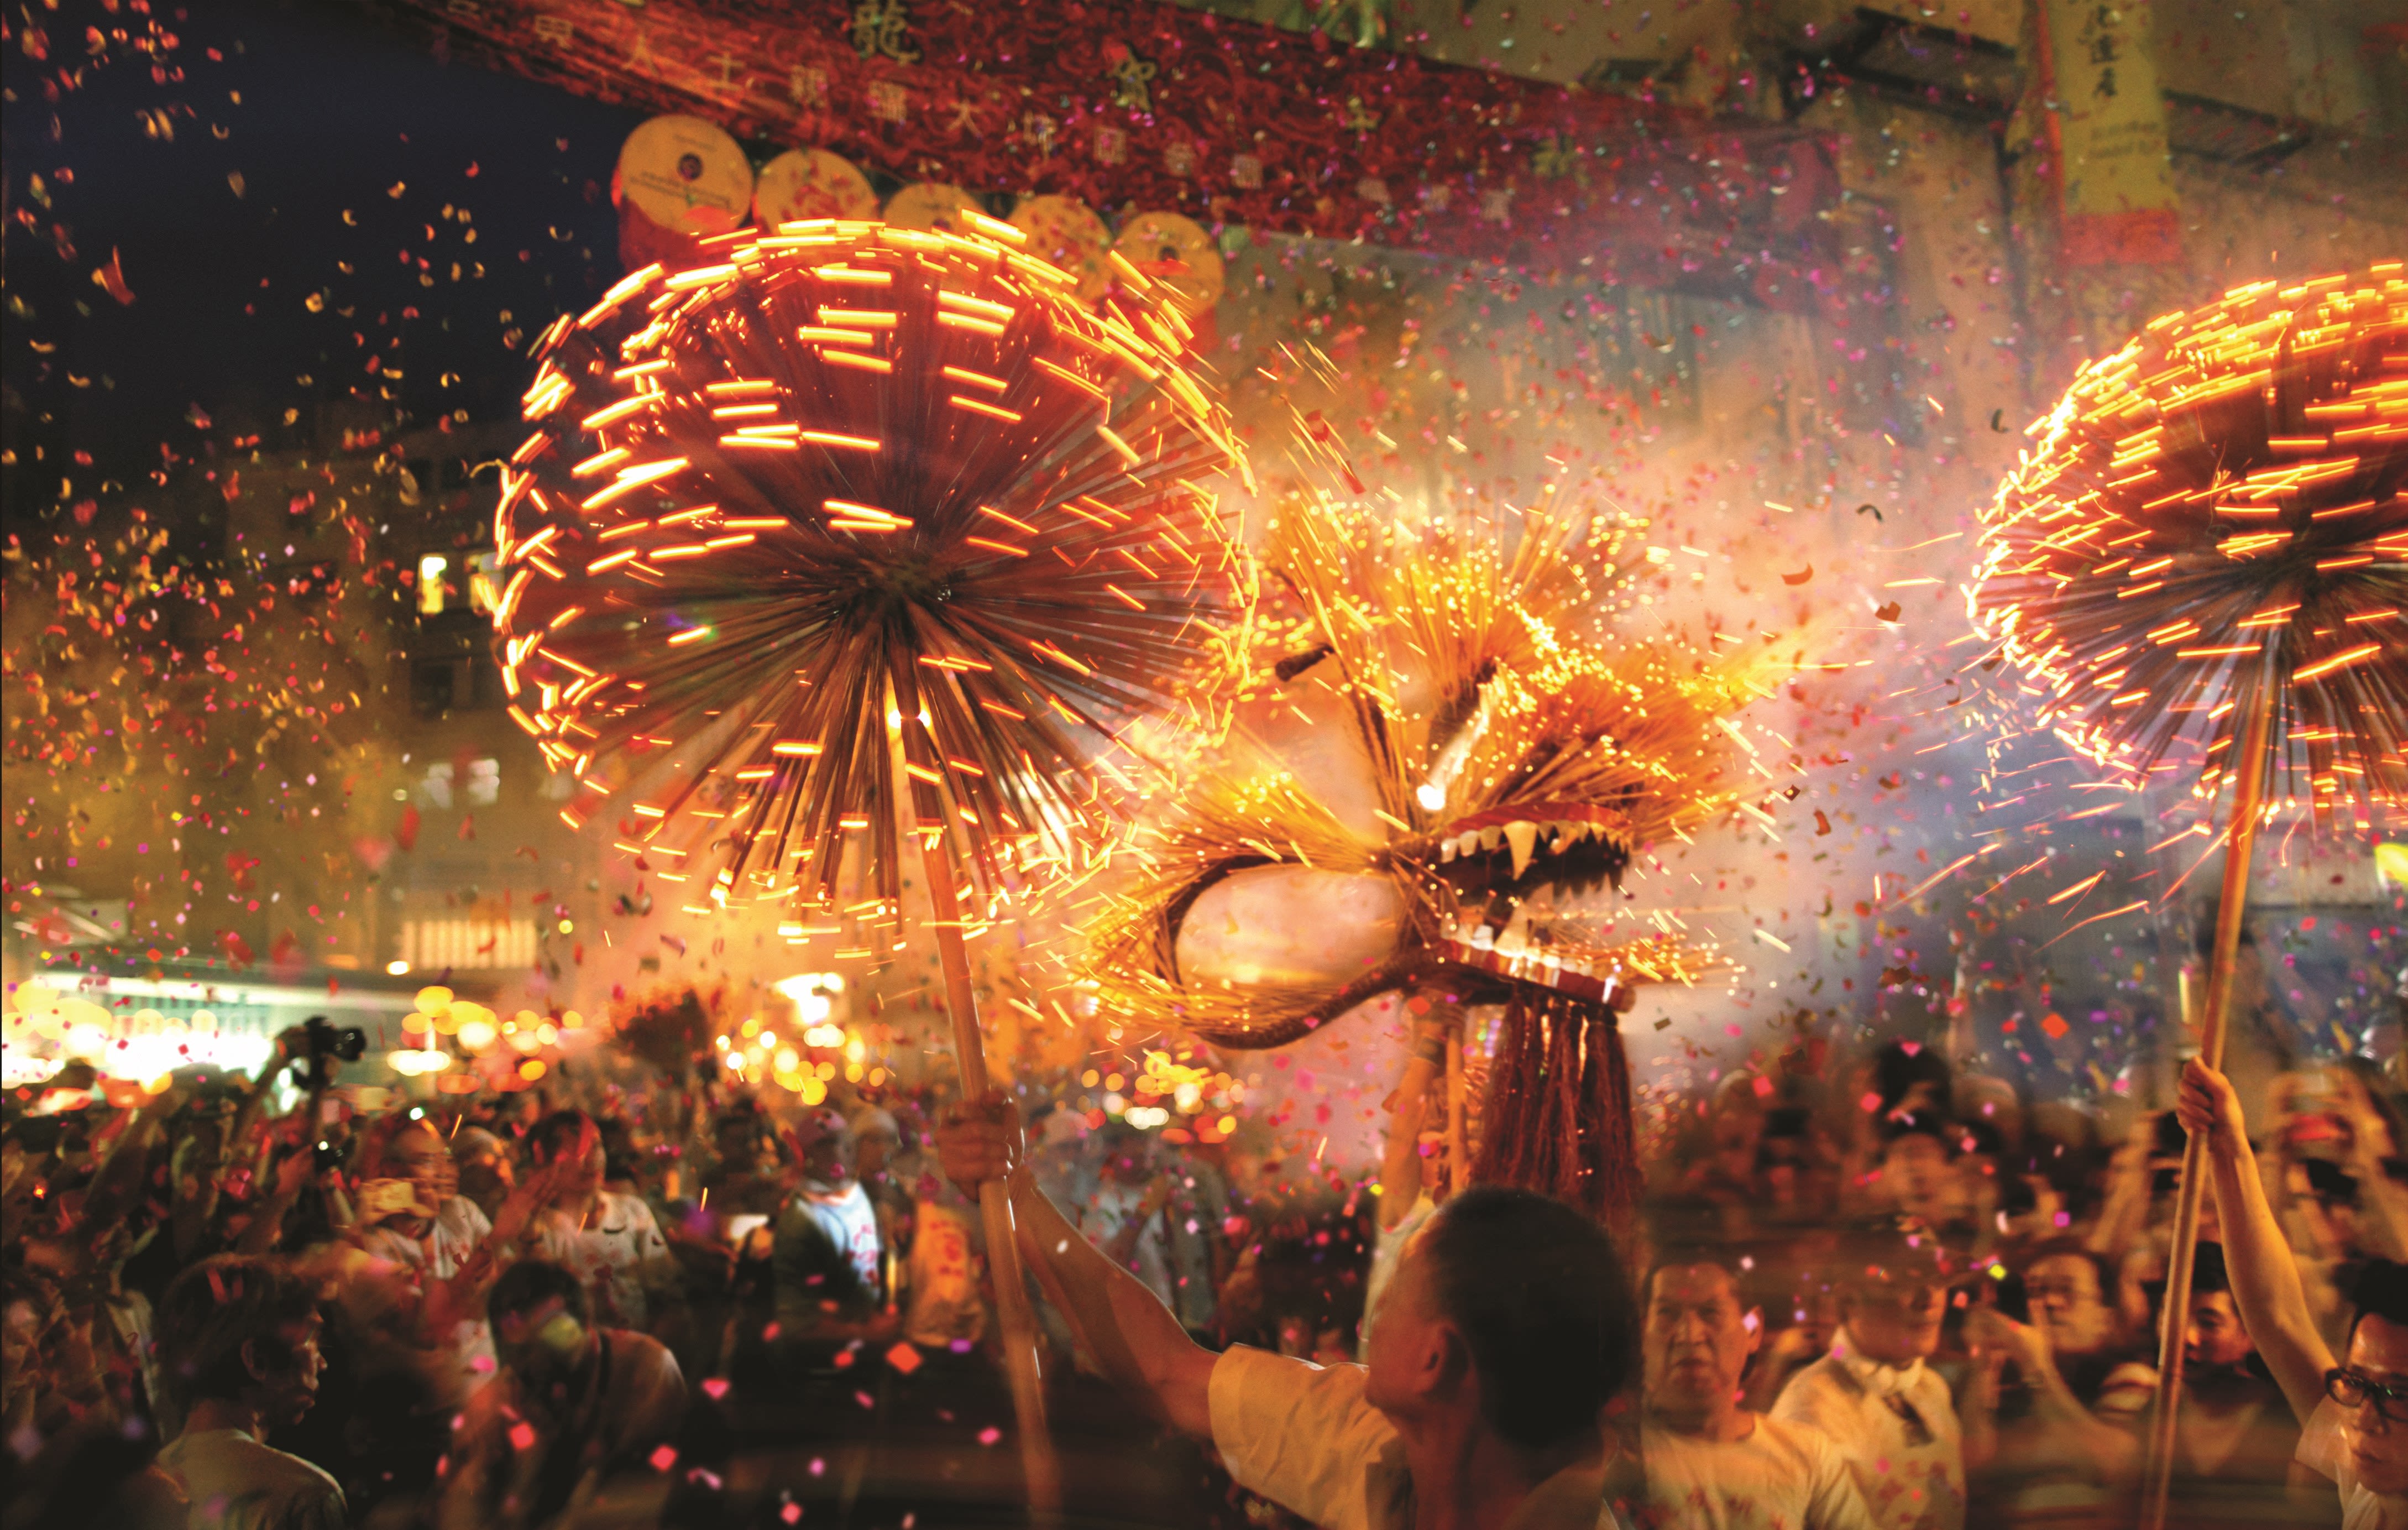 What is Mid-Autumn Festival all about?